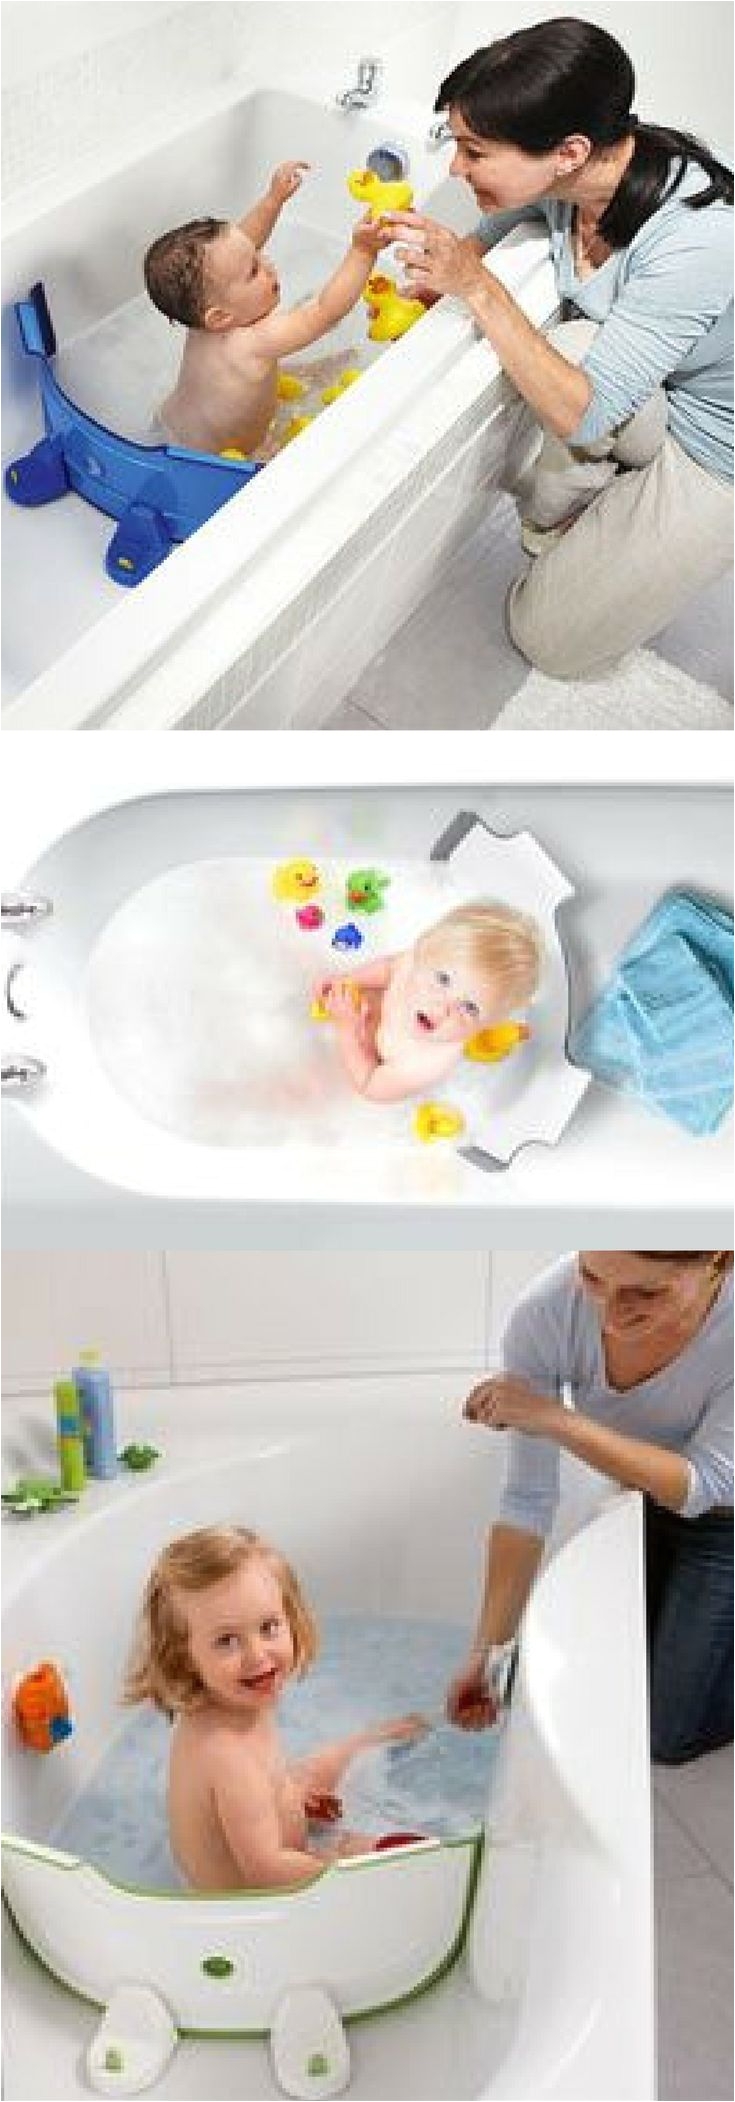 baby dam bath divider this saves to much water during bath time plus it